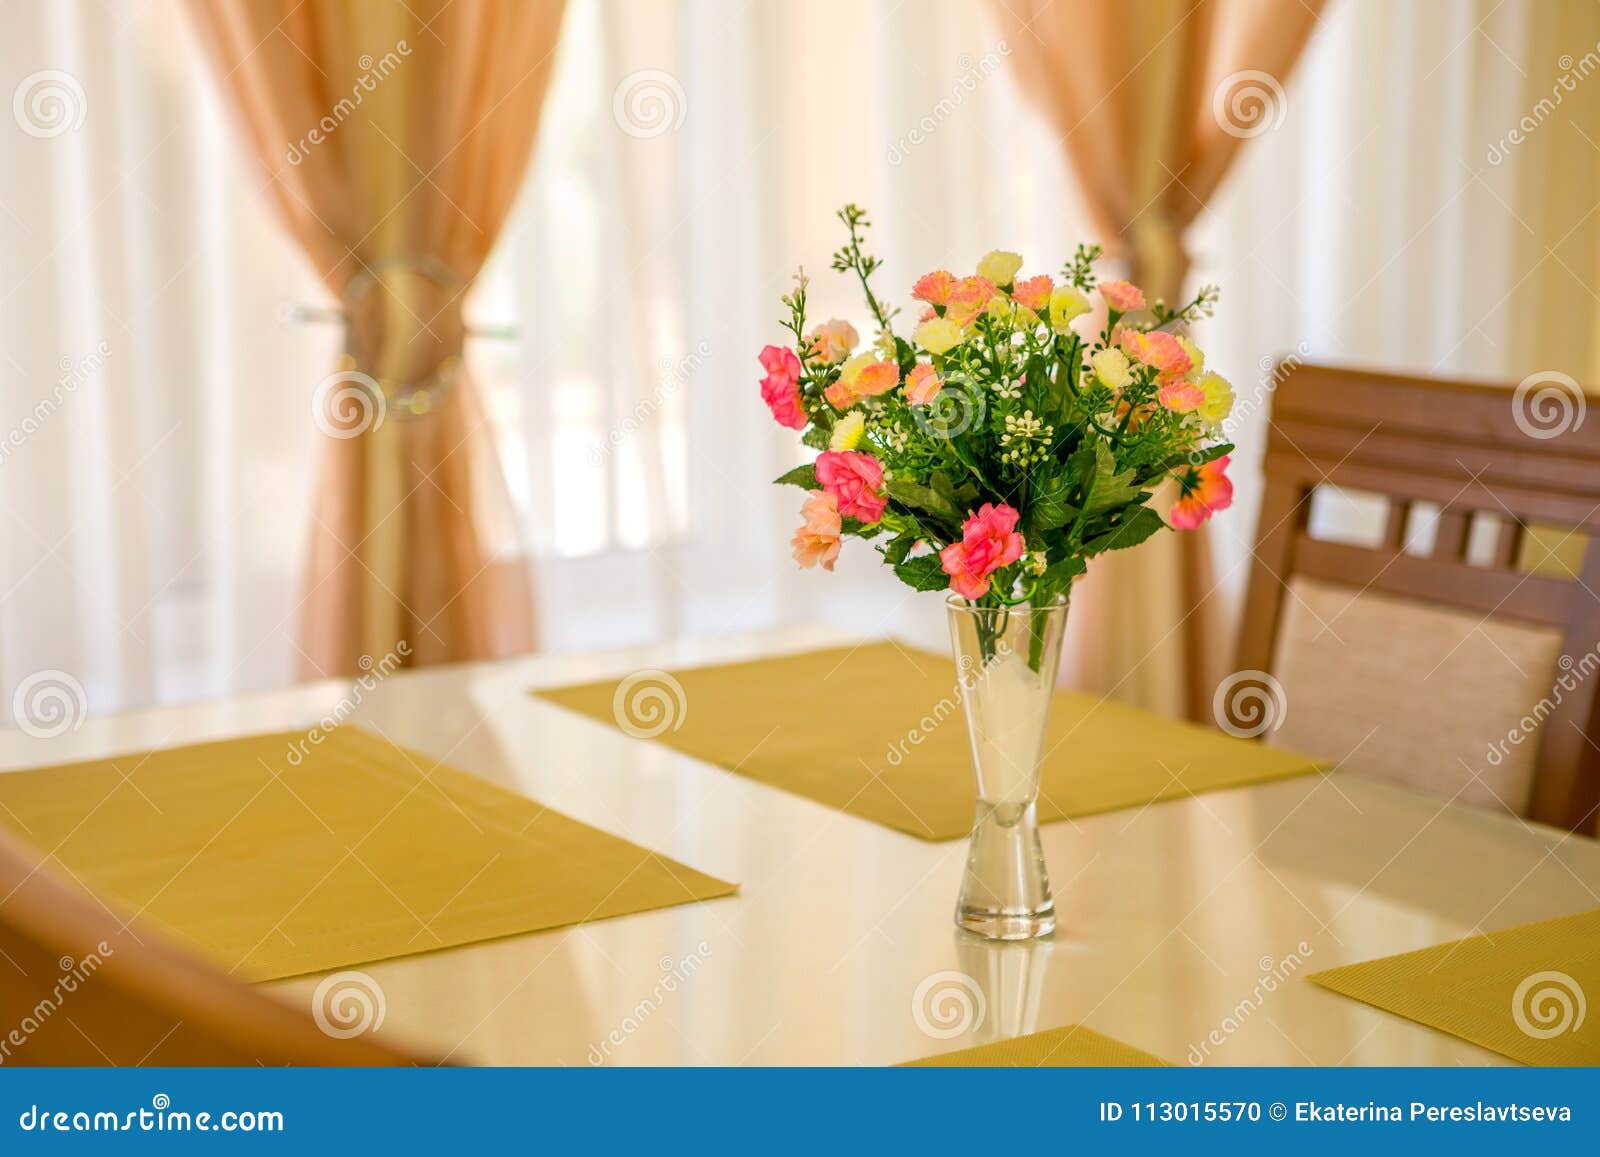 Flower In Vase On Table And Window Sill Background Vintage